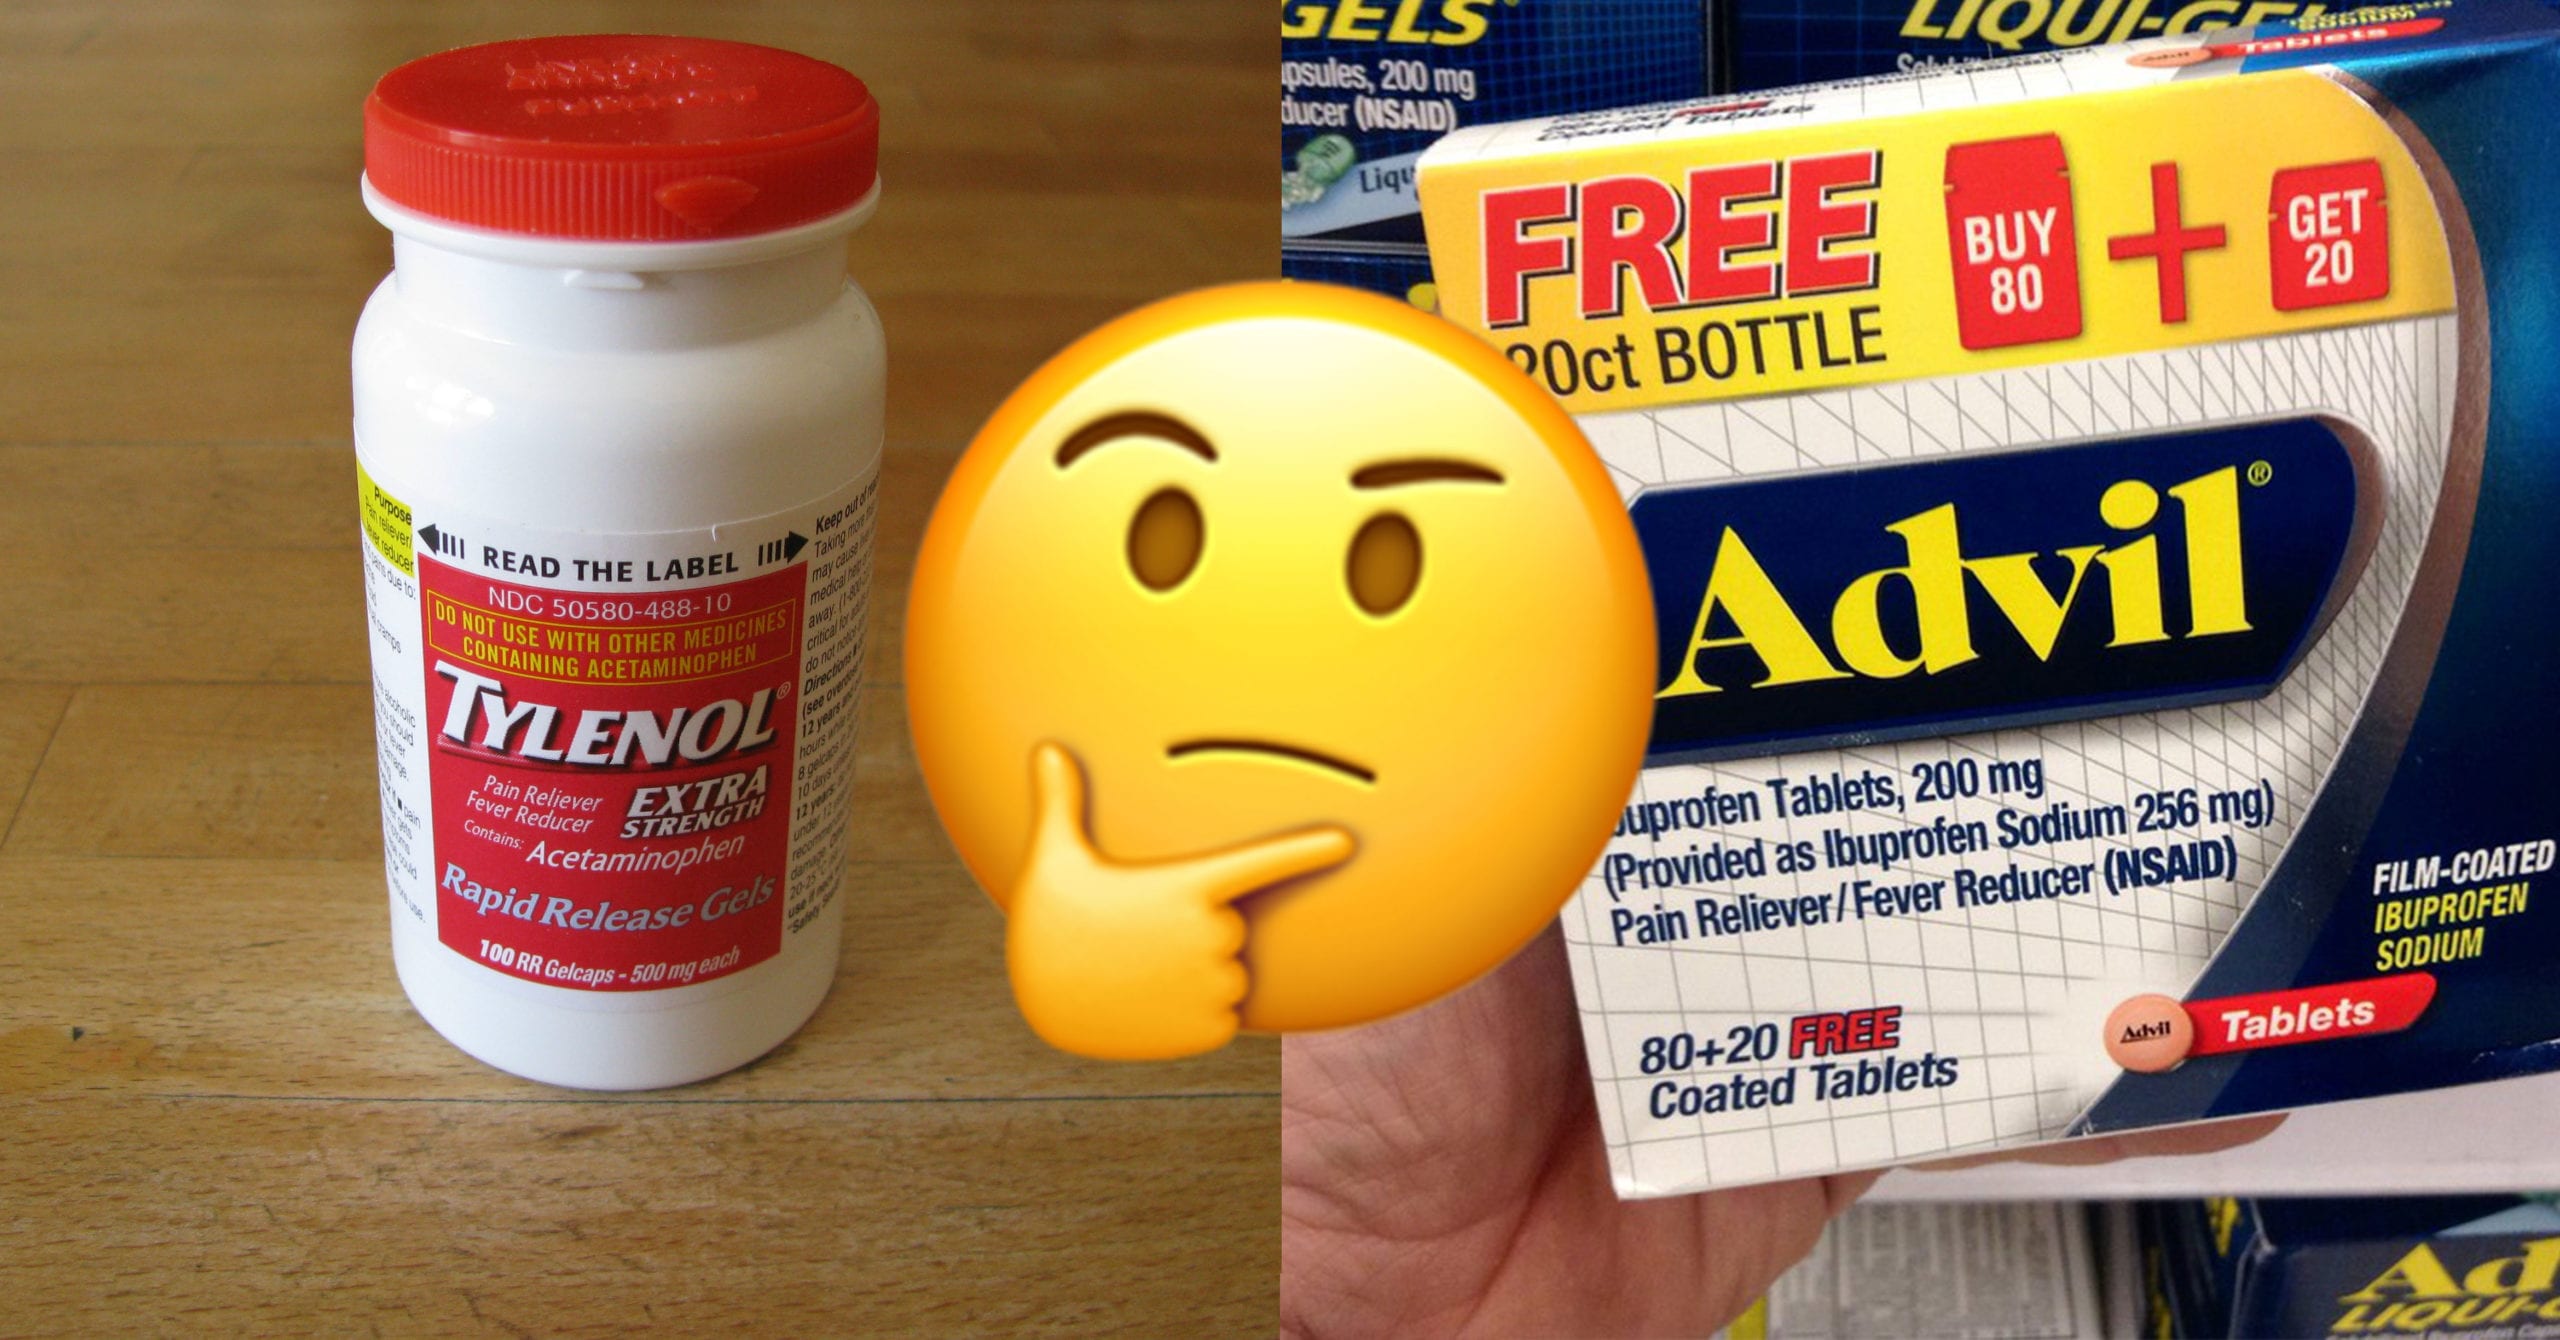 aremedesign: Difference Between Acetaminophen And Aspirin